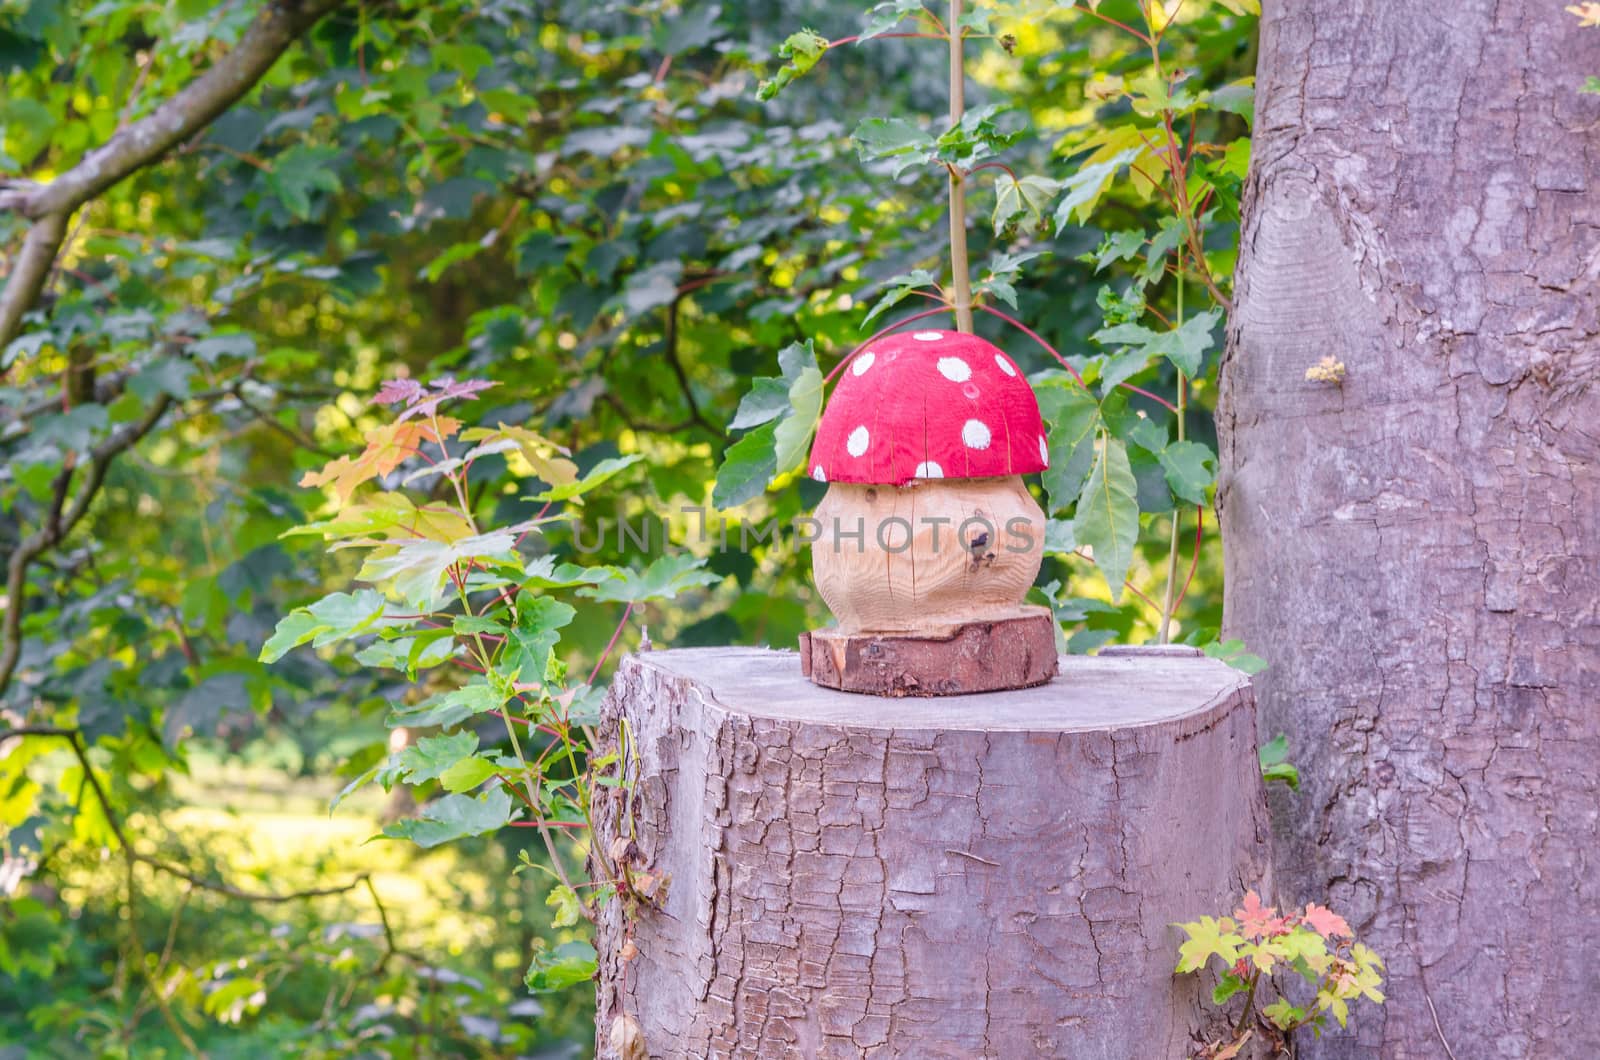 Fly agaric by JFsPic